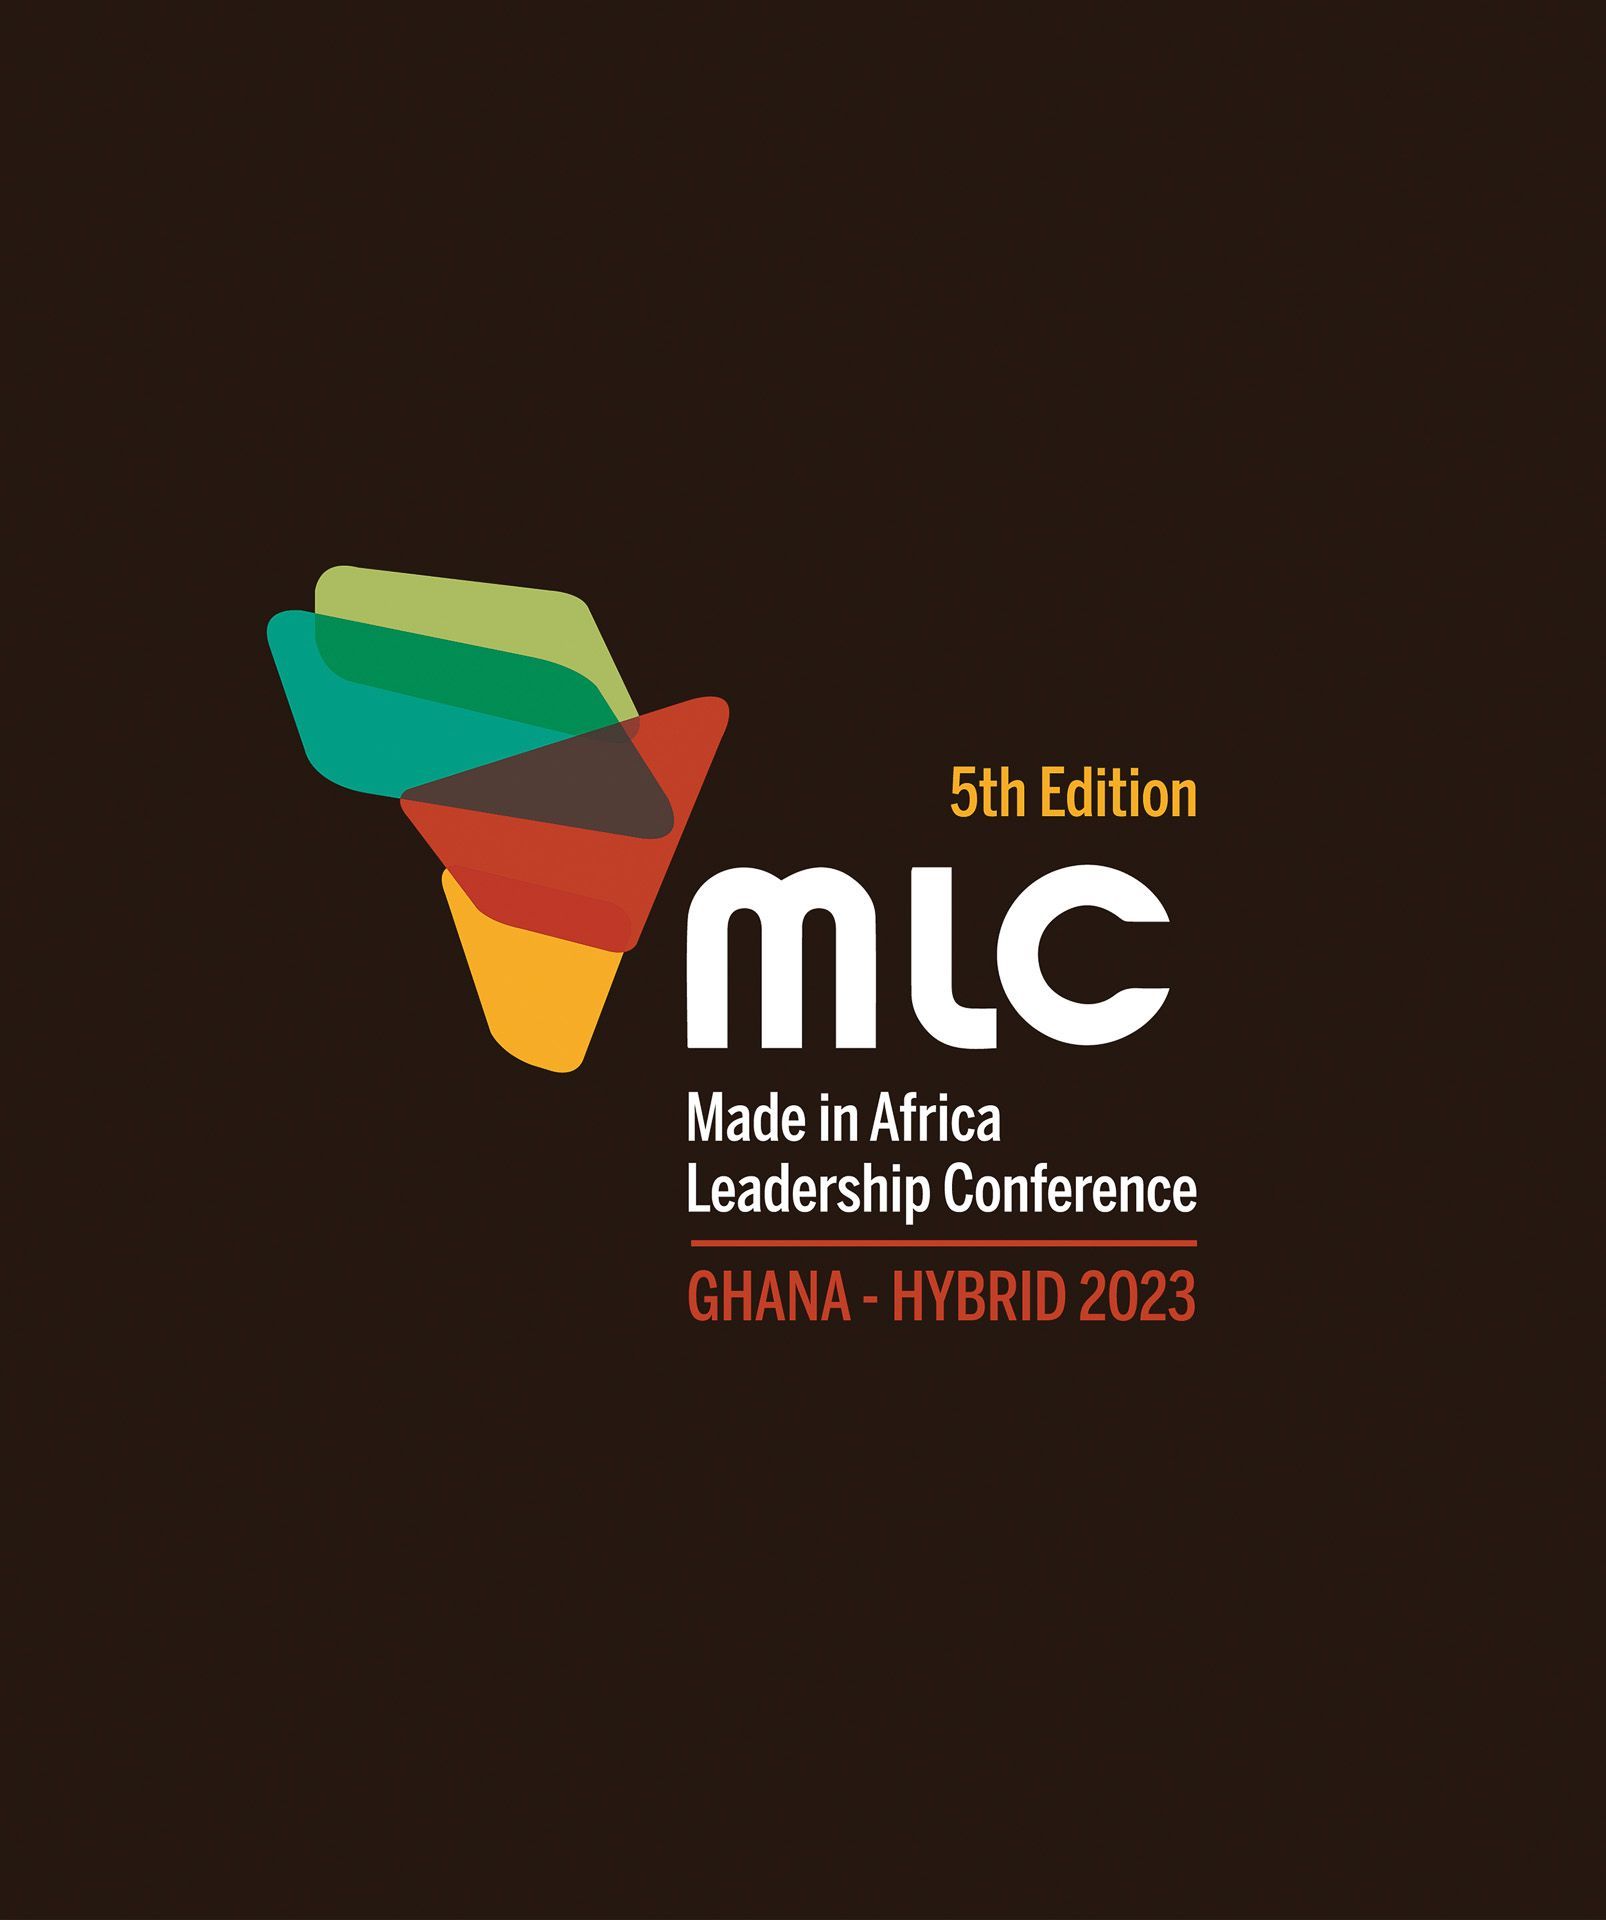 ThirdLaw branding and web design - Made in Africa Leadership Conference (MLC2023) Cover